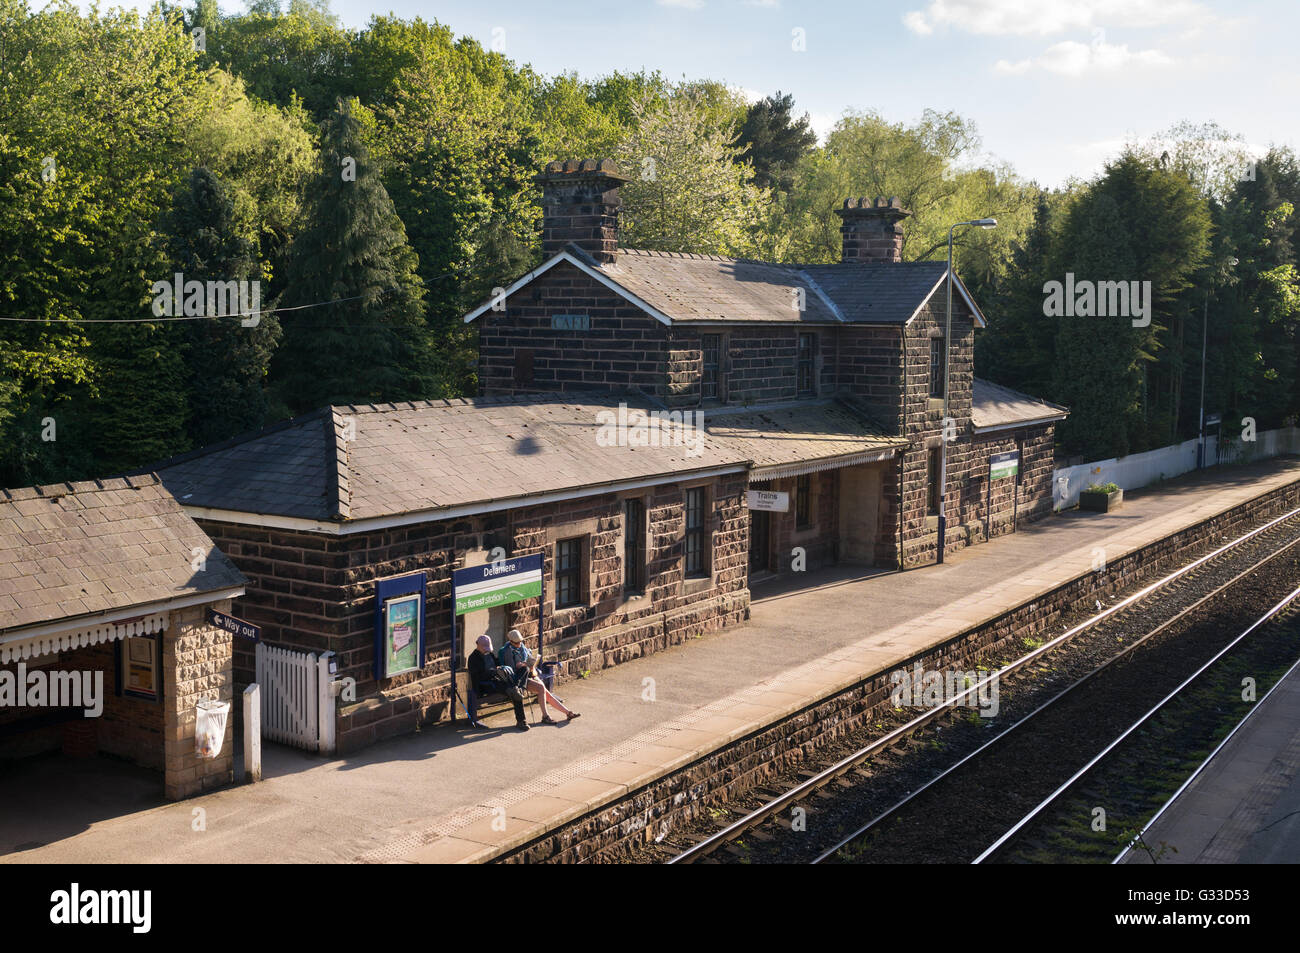 A couple waiting for a train on Delamere Railway Station , Cheshire, England, UK Stock Photo